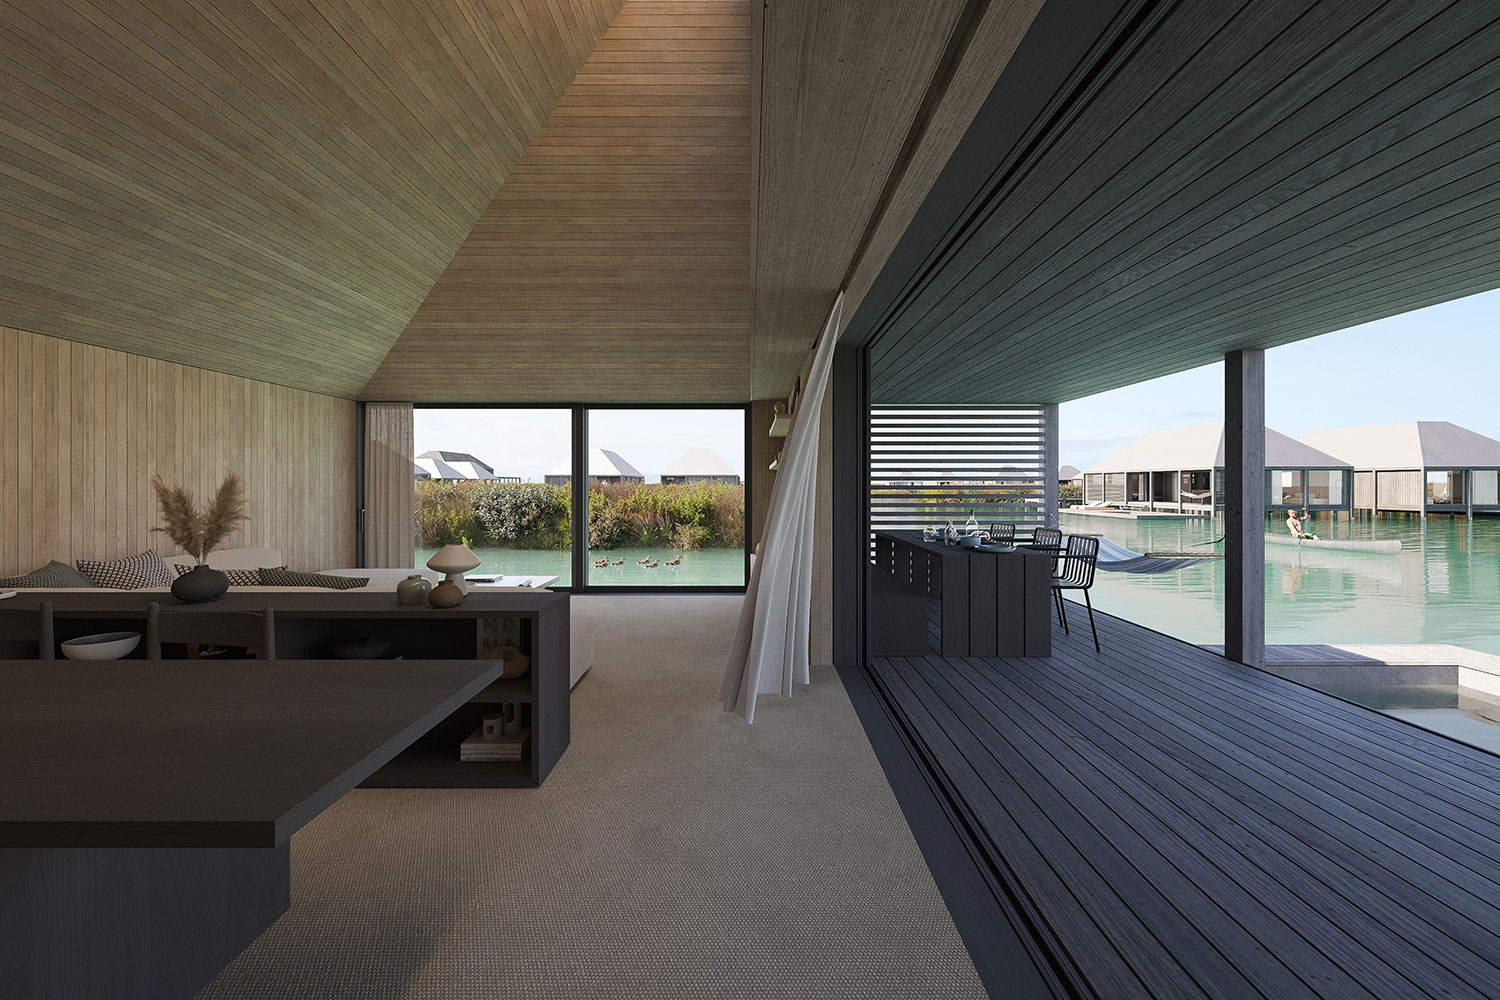 New Stilt-House Hotel in Portugal: MAST's Innovative Project Set to Transform Abandoned Salina